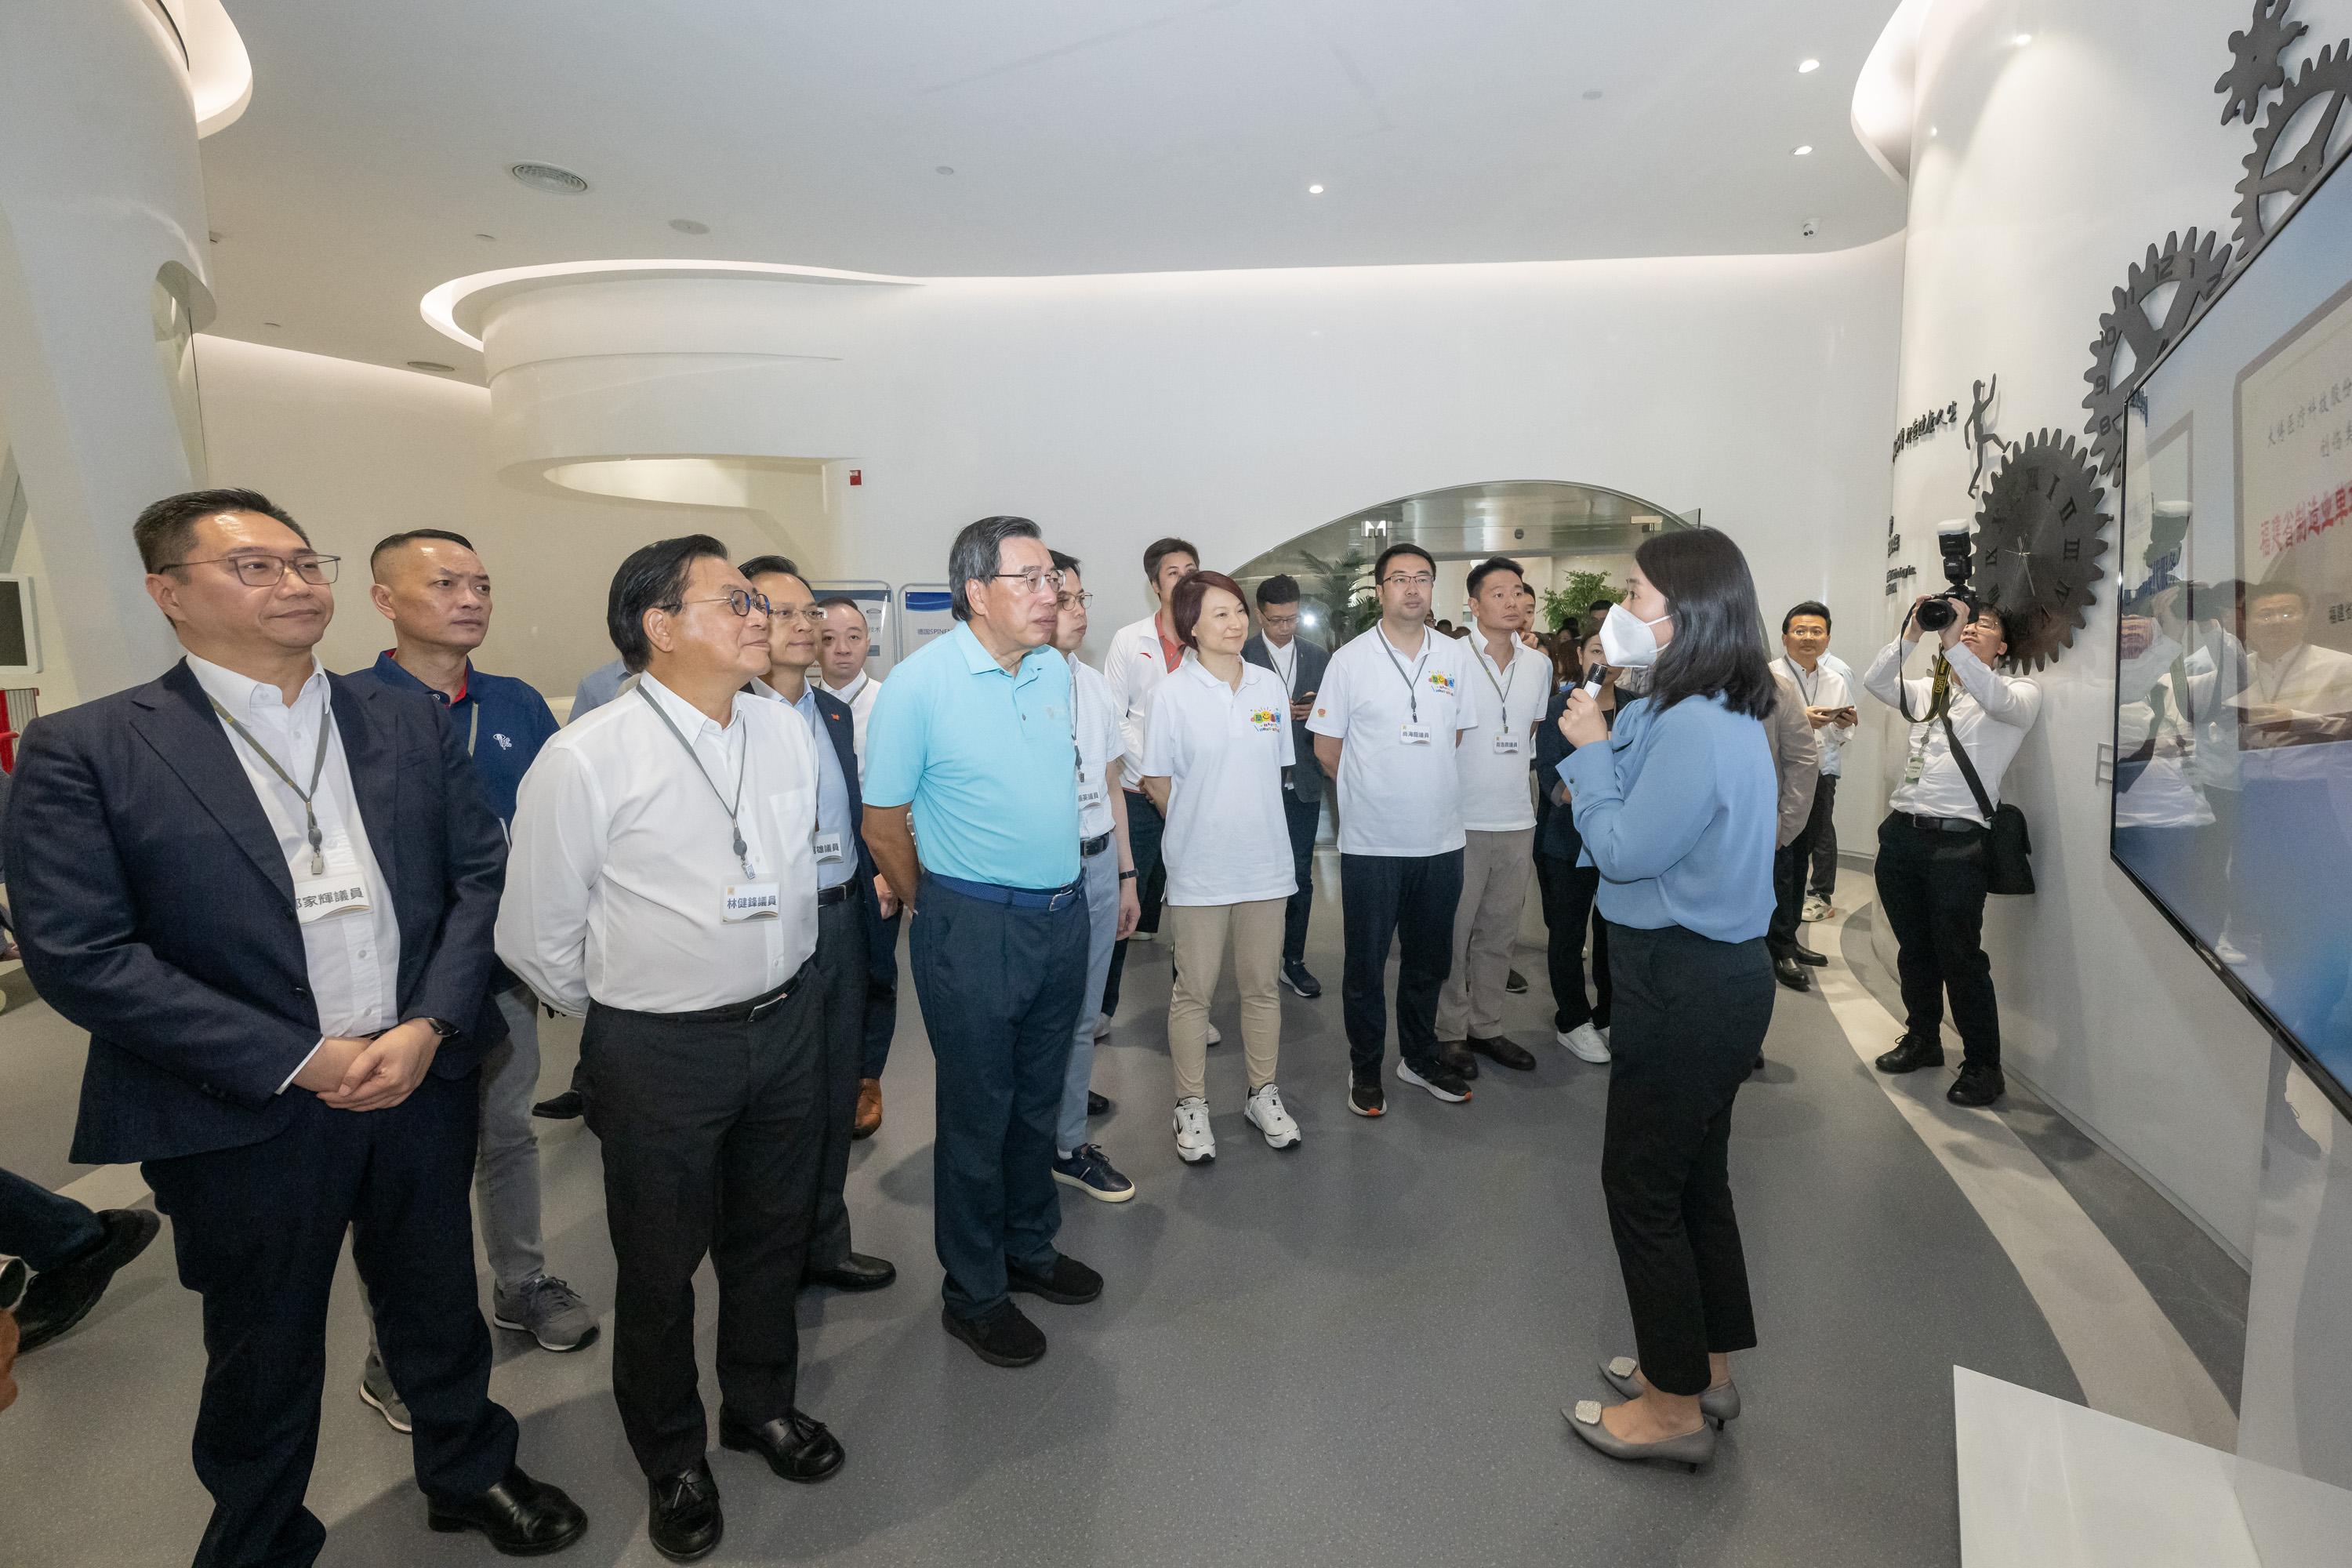 The delegation of the Legislative Council (LegCo), led by the LegCo President, Mr Andrew Leung, continues its study visit in Fujian and visits Xiamen today (July 17). Photo shows the delegation visiting Double Medical Technology Inc.